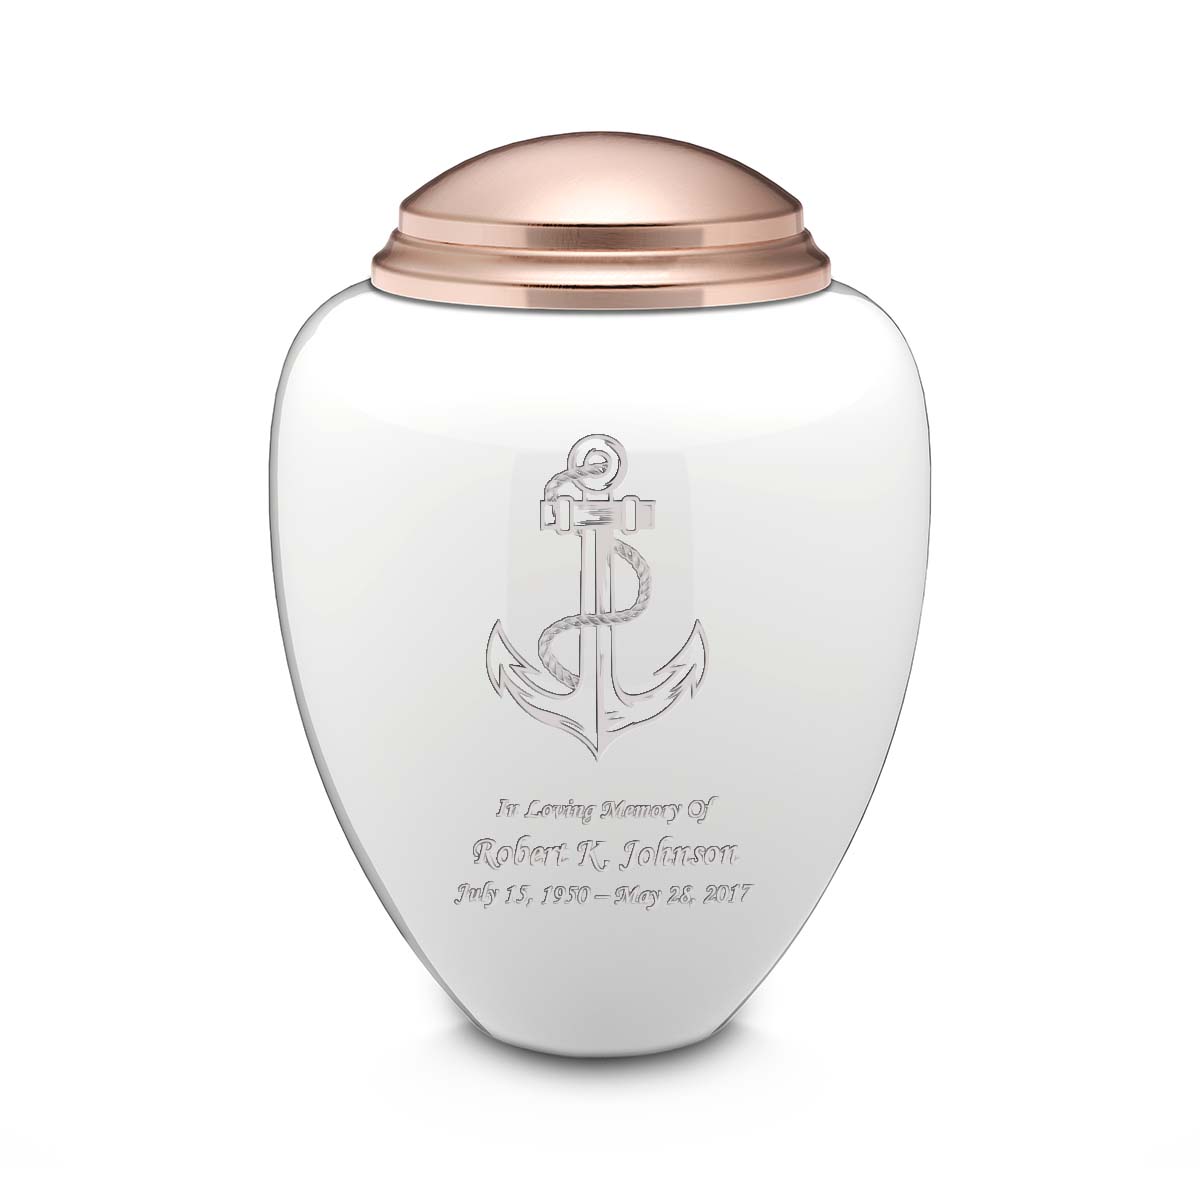 Adult Tribute White & Rose Gold Anchor Cremation Urn